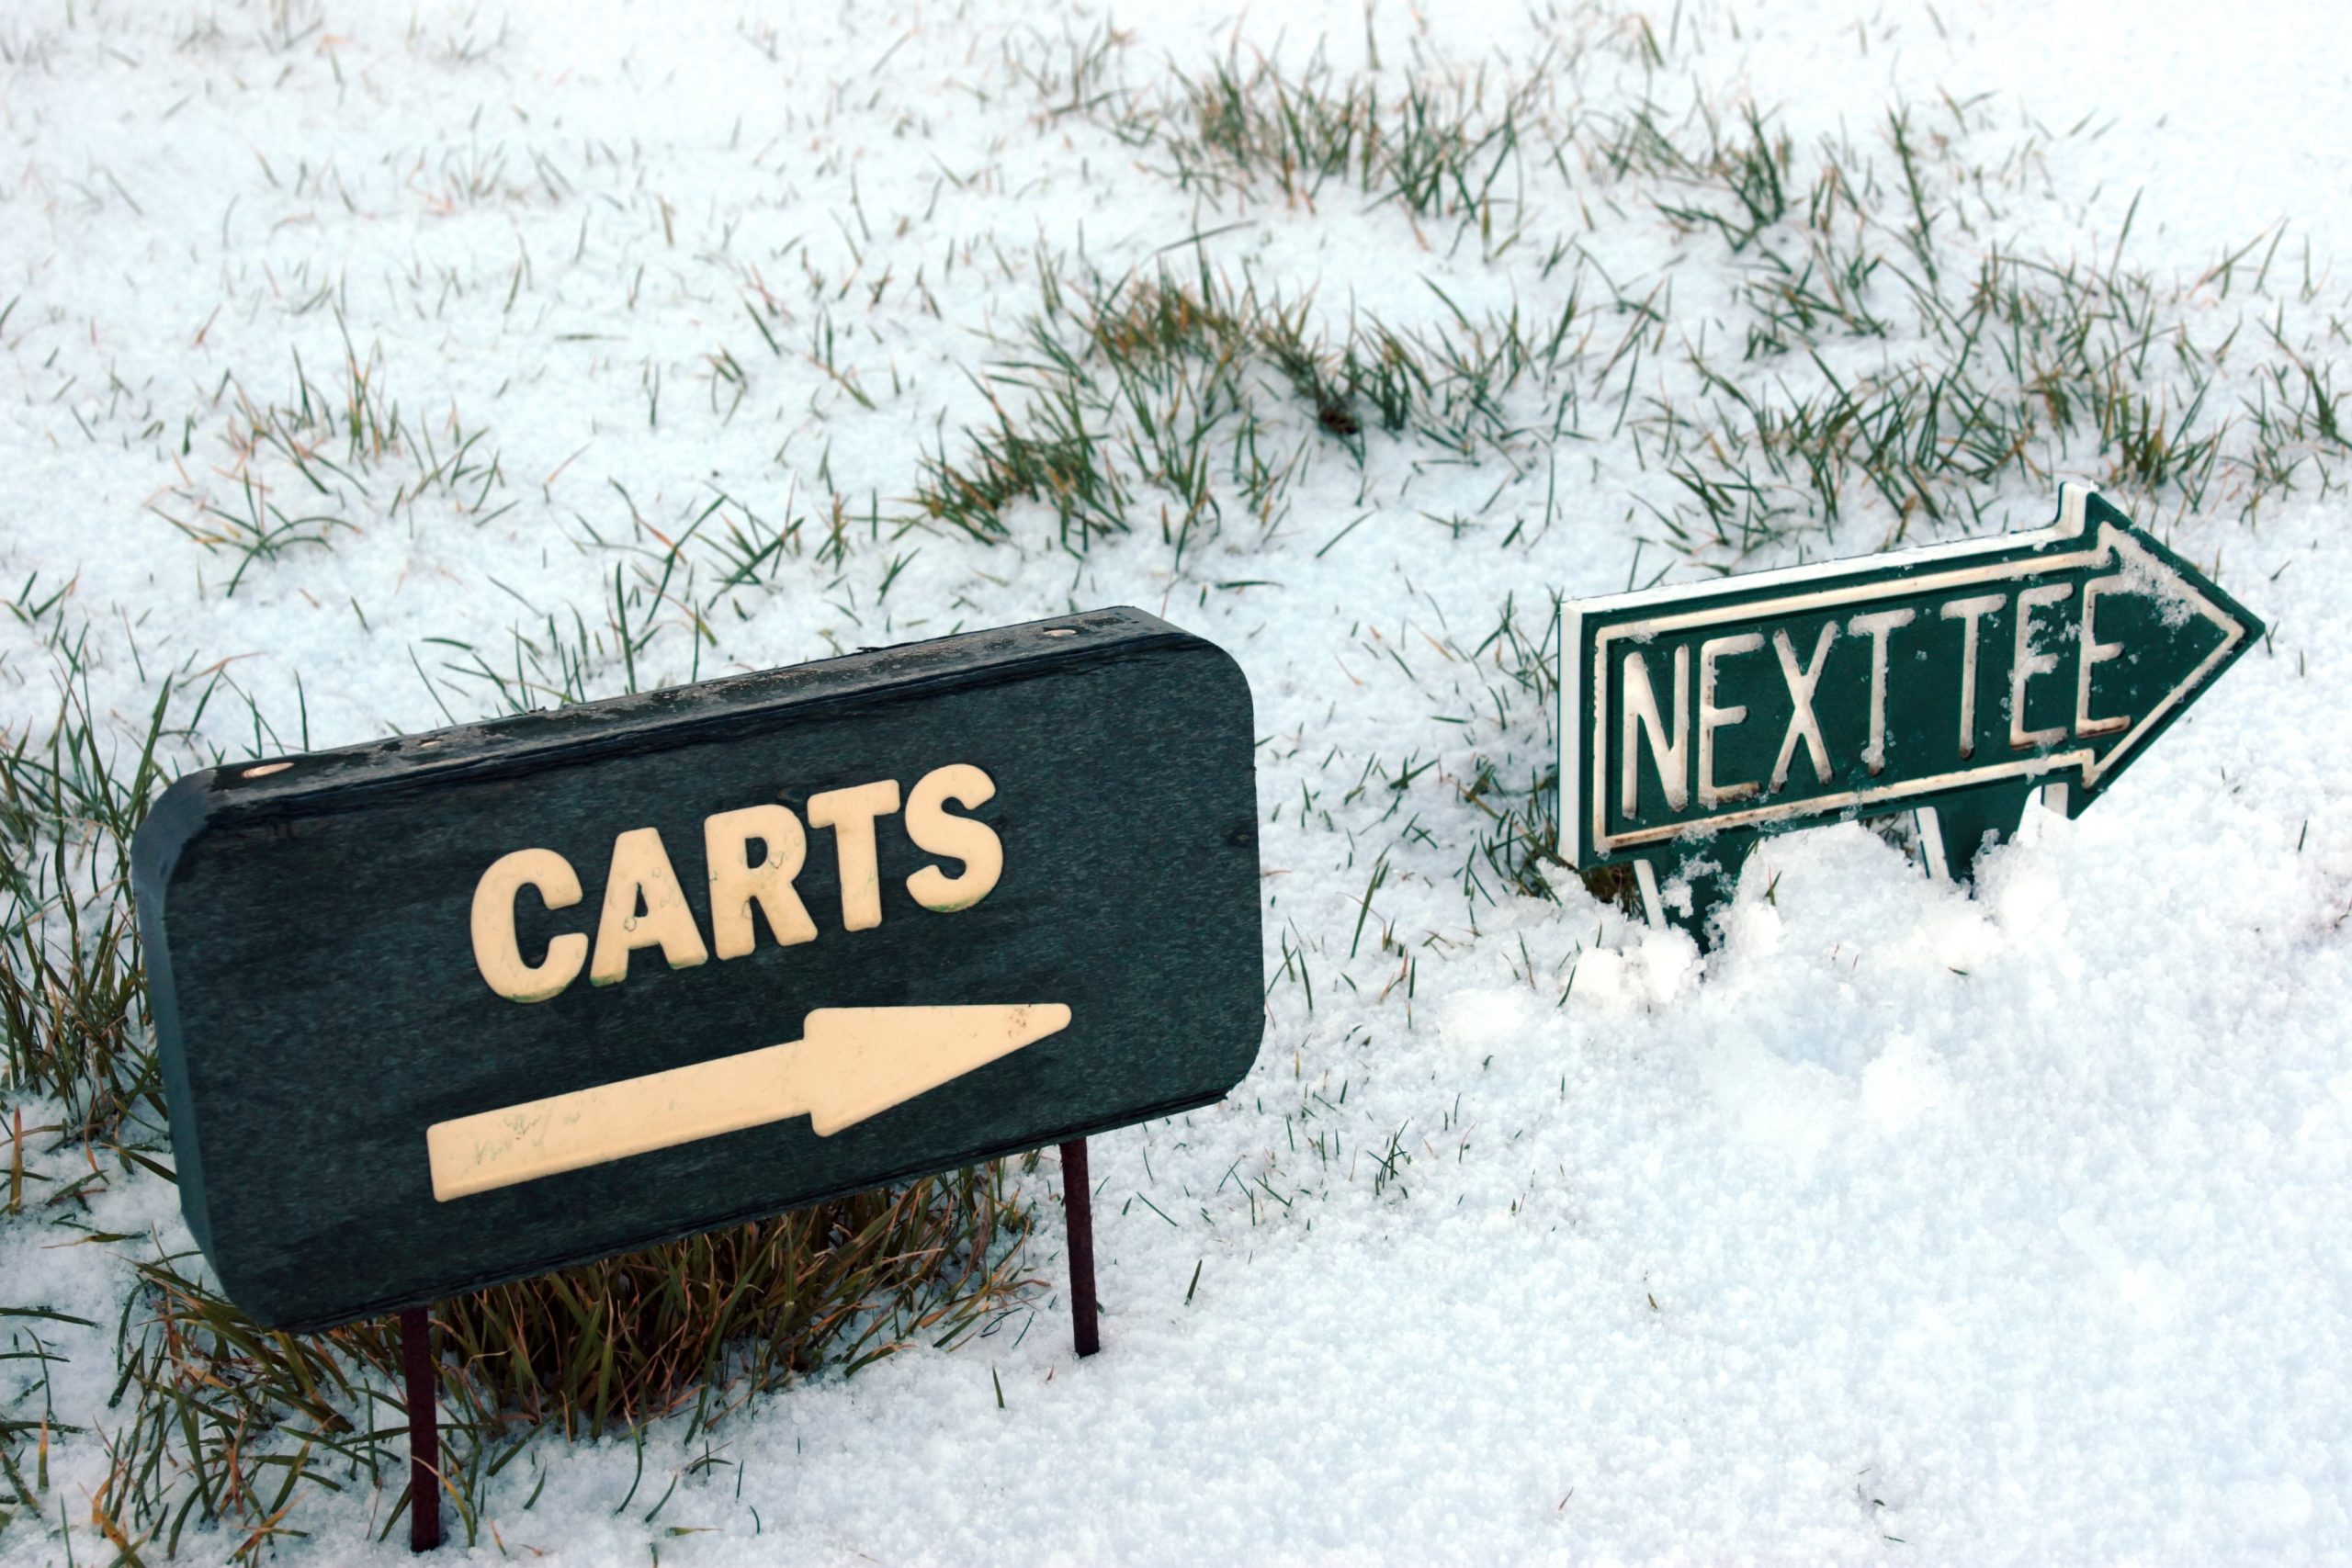 carts and next tee sign on a snow covered links golf course in ireland in snowy winter weather